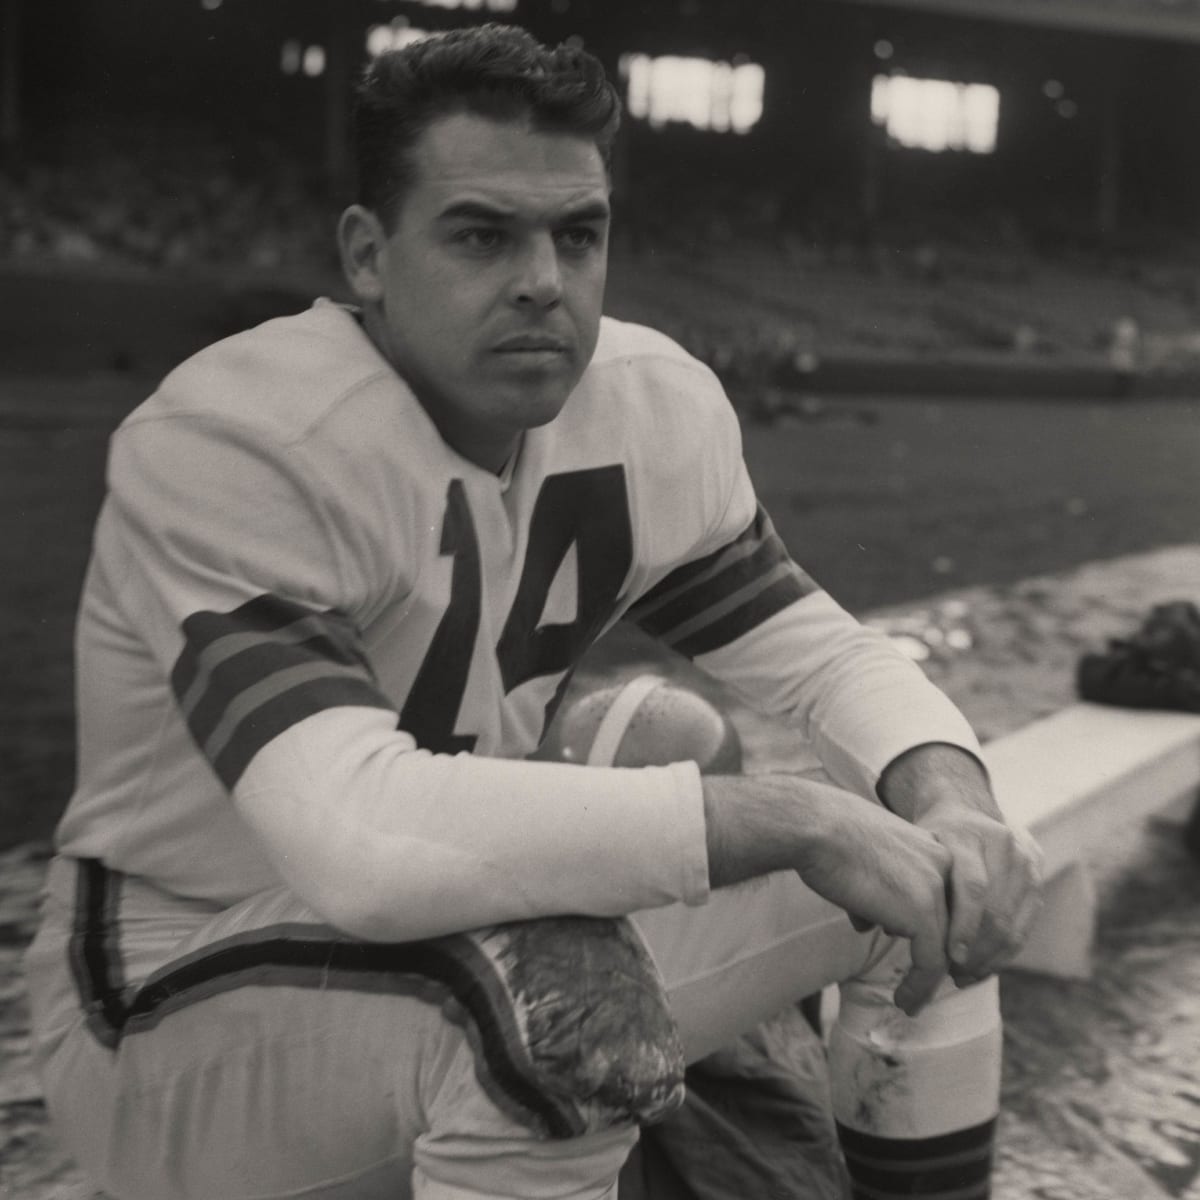 Otto Graham Cleveland Browns Hall of Fame QB Interview by Kevin